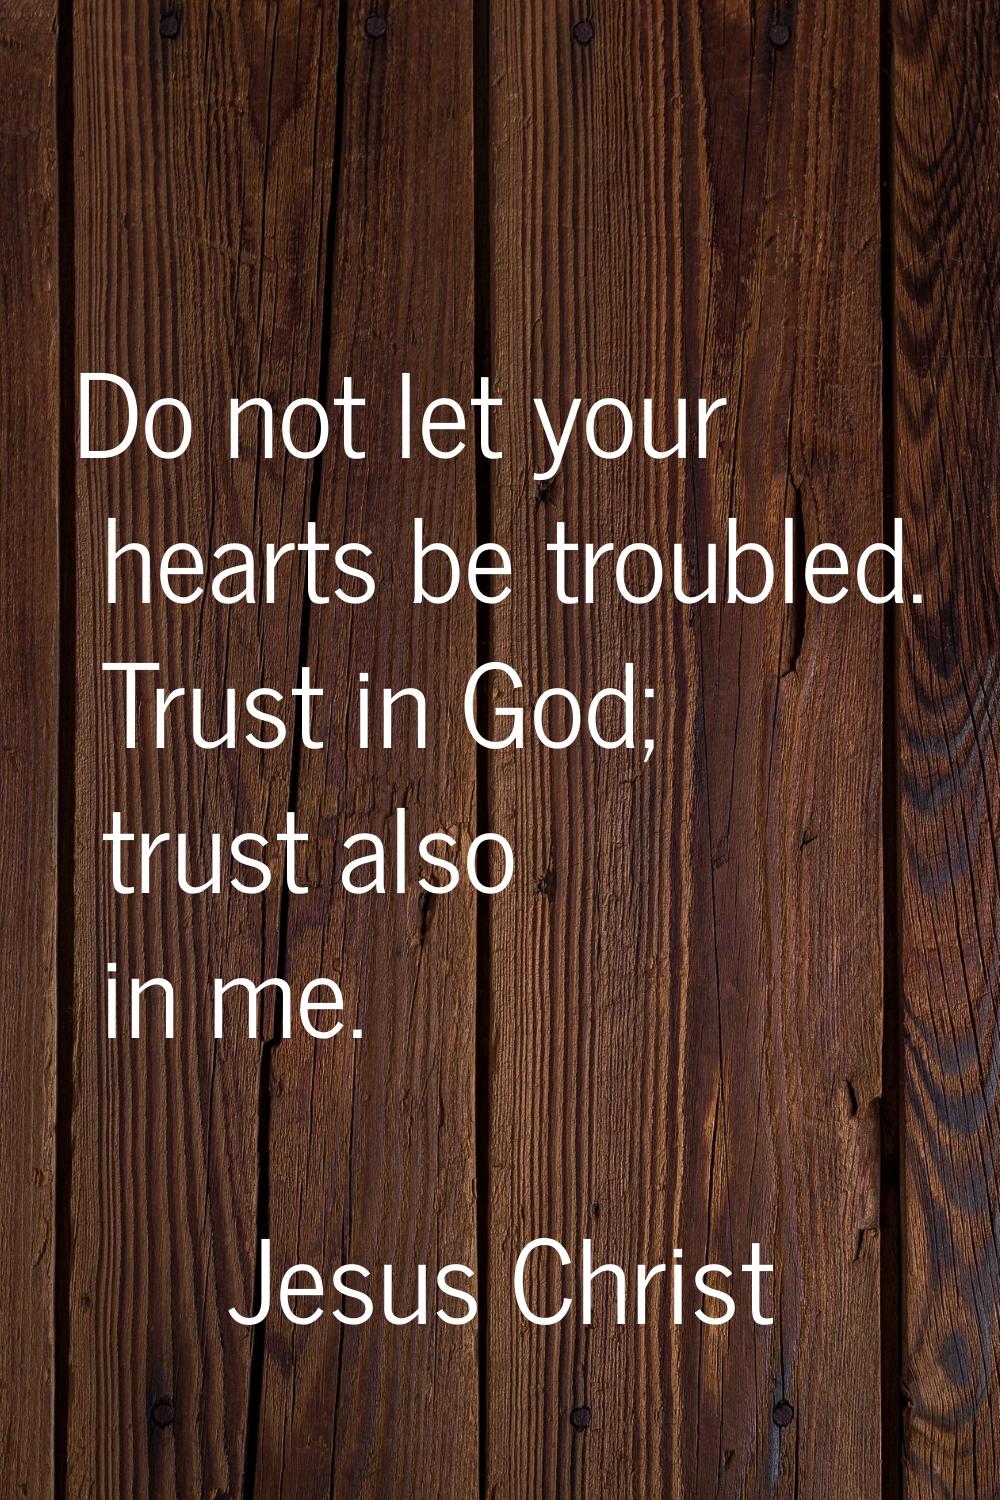 Do not let your hearts be troubled. Trust in God; trust also in me.